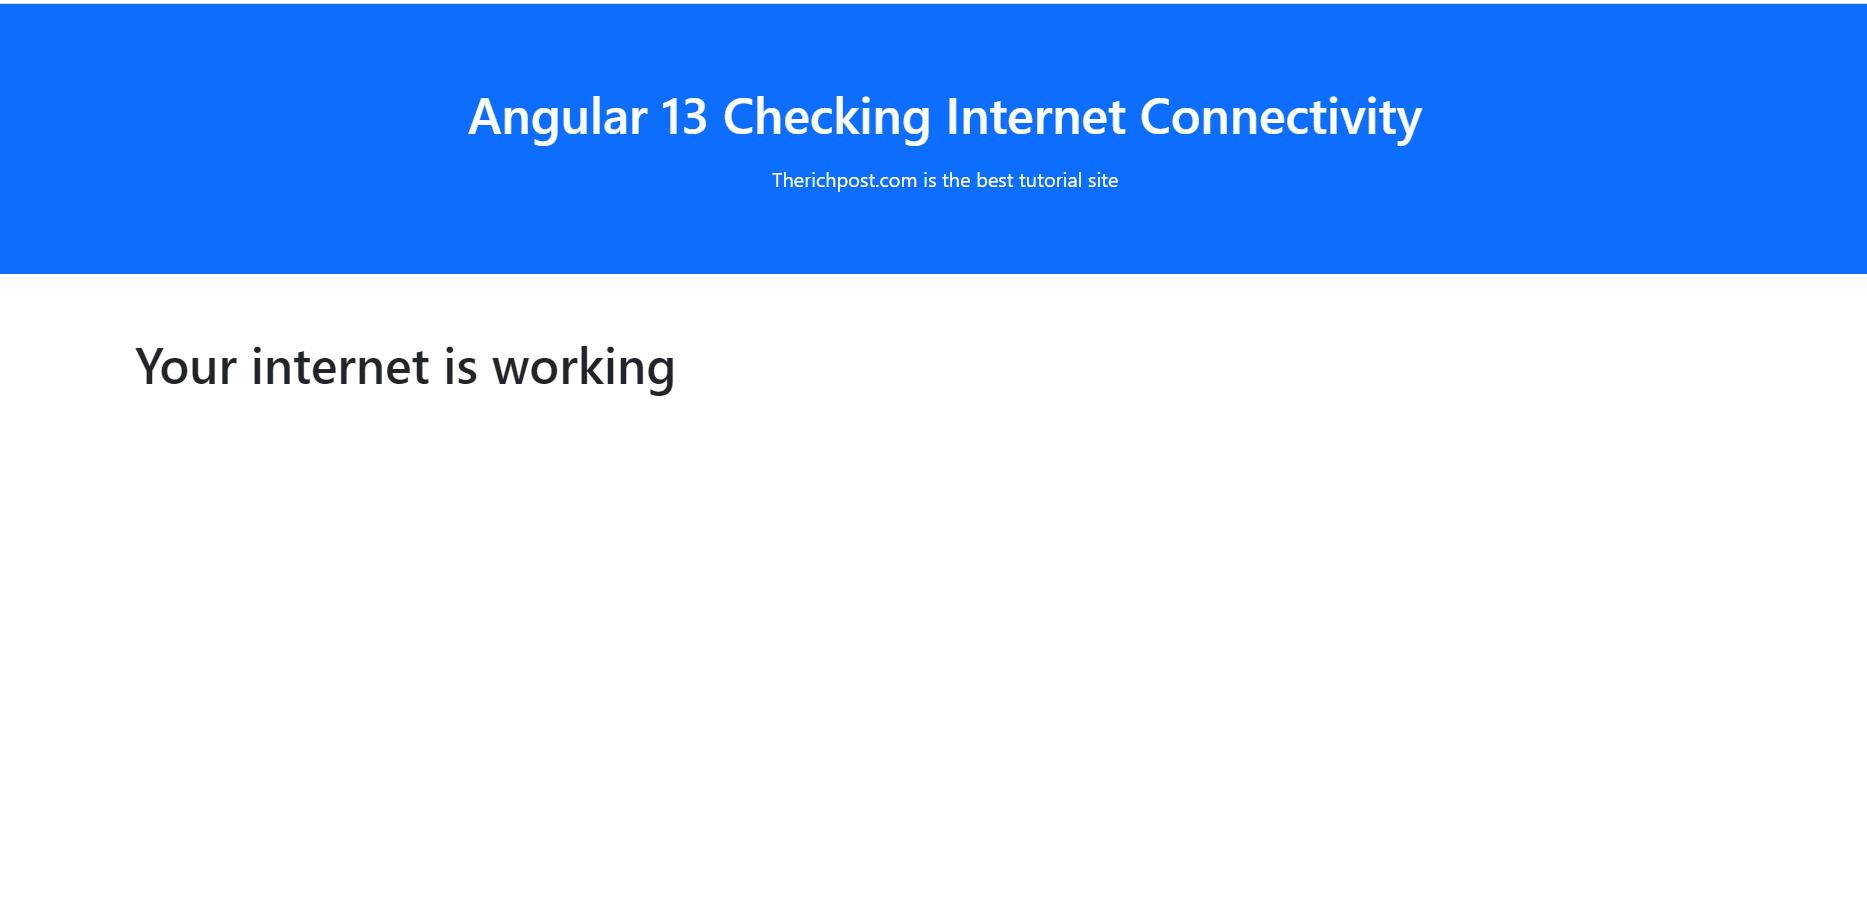 Angular 13 Check Internet Connection Working Functionality